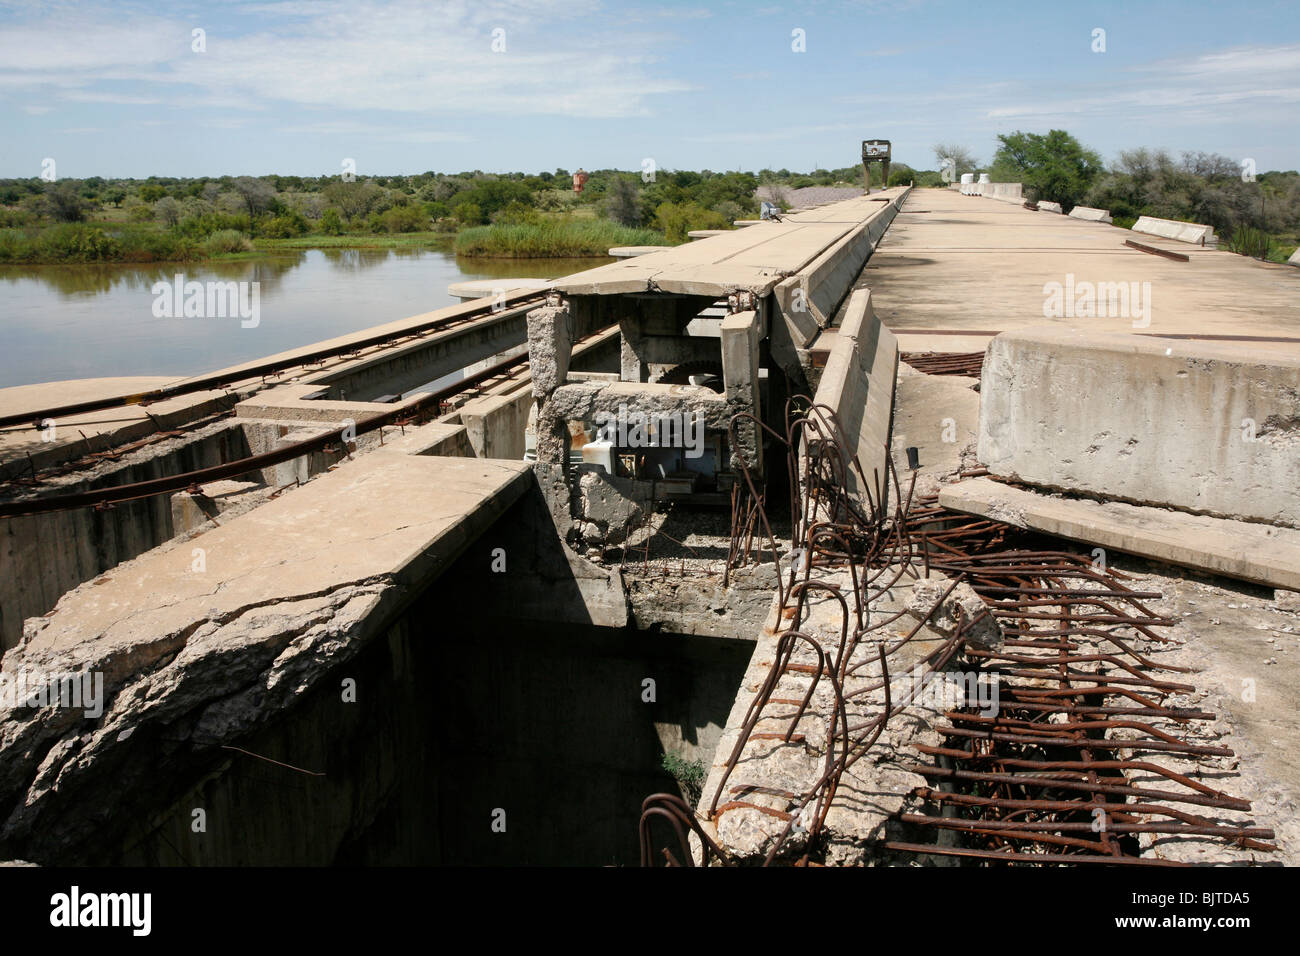 War damage remains on one of the many hydroelectric dams on the Cunene river. Cunene Province, Southern Angola, Africa. Stock Photo